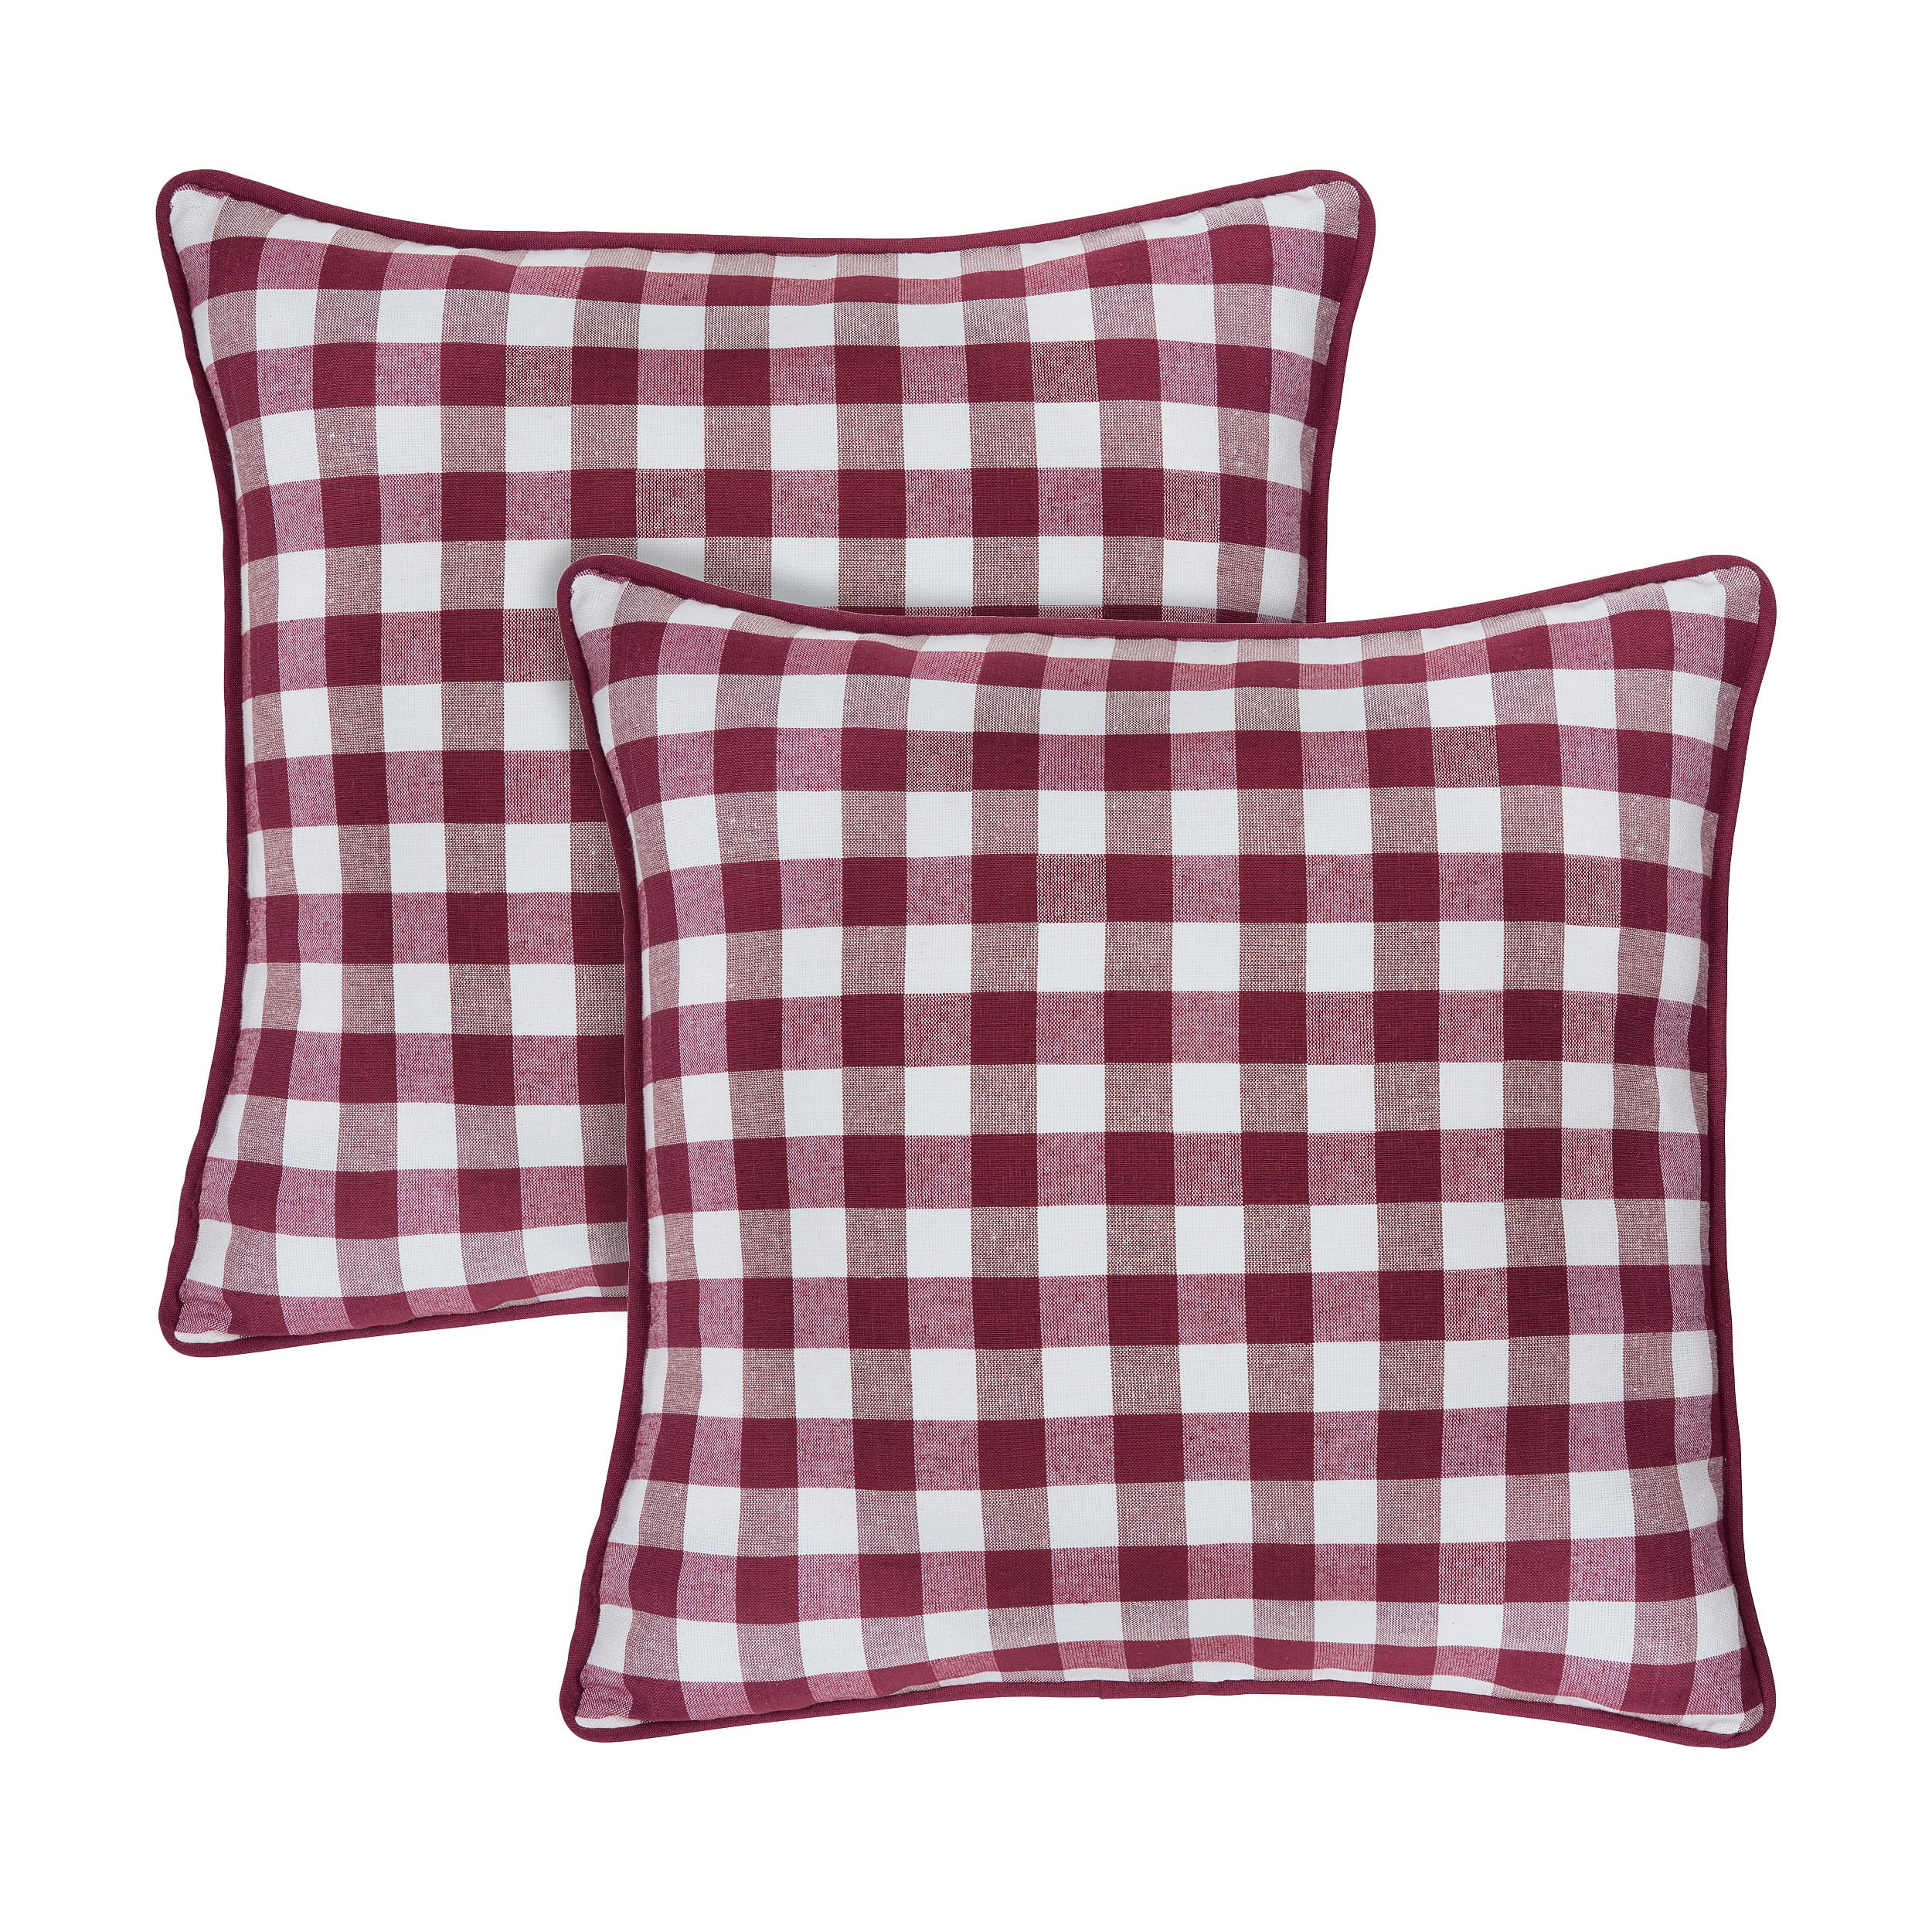 Picture of Achim BCPC18BU72 18 x 18 in. Buffalo Check Pillow Covers, Burgundy